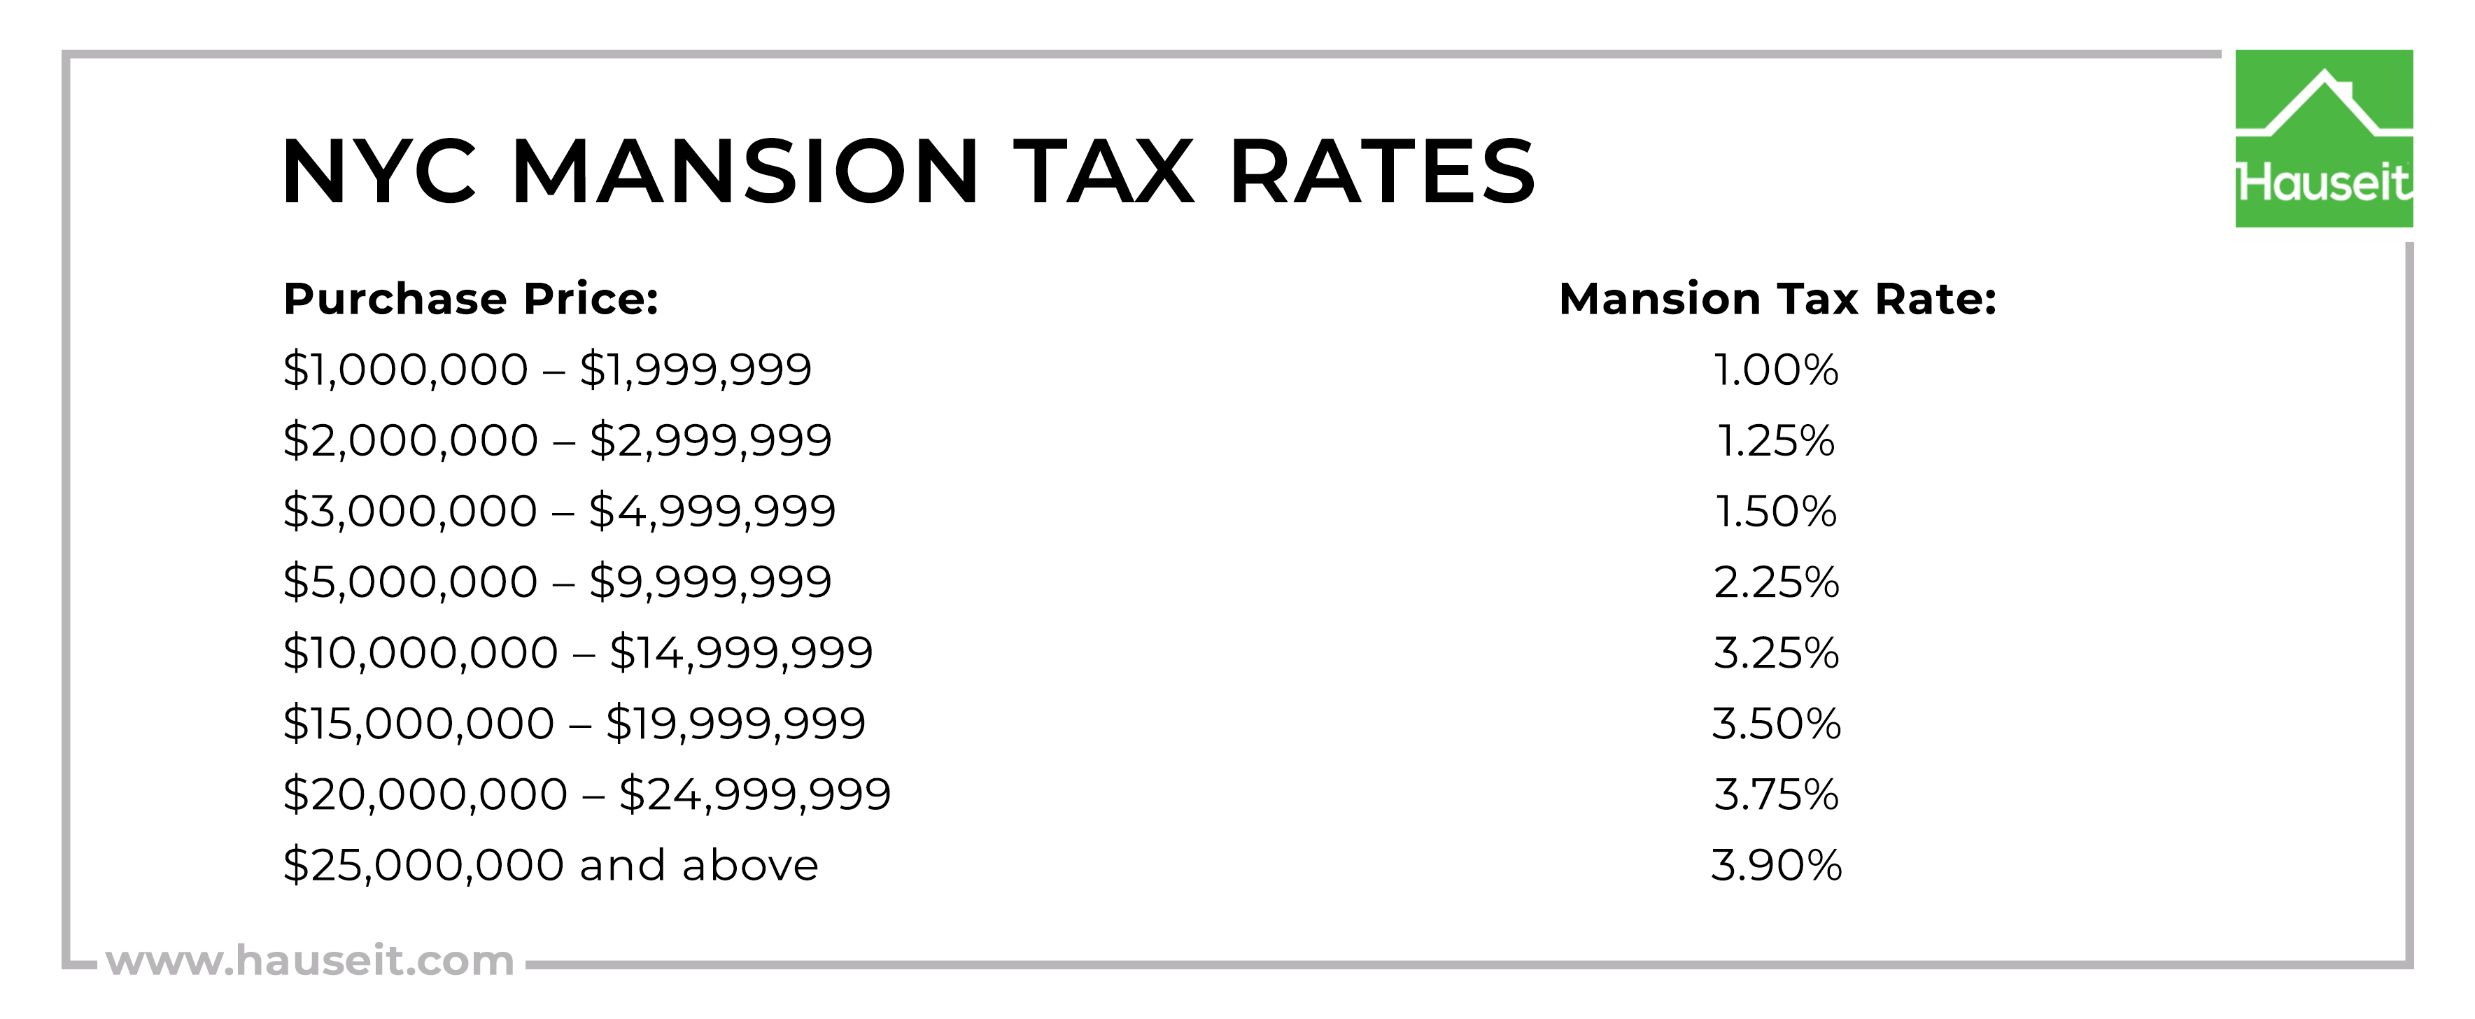 NYC Mansion Tax Rates